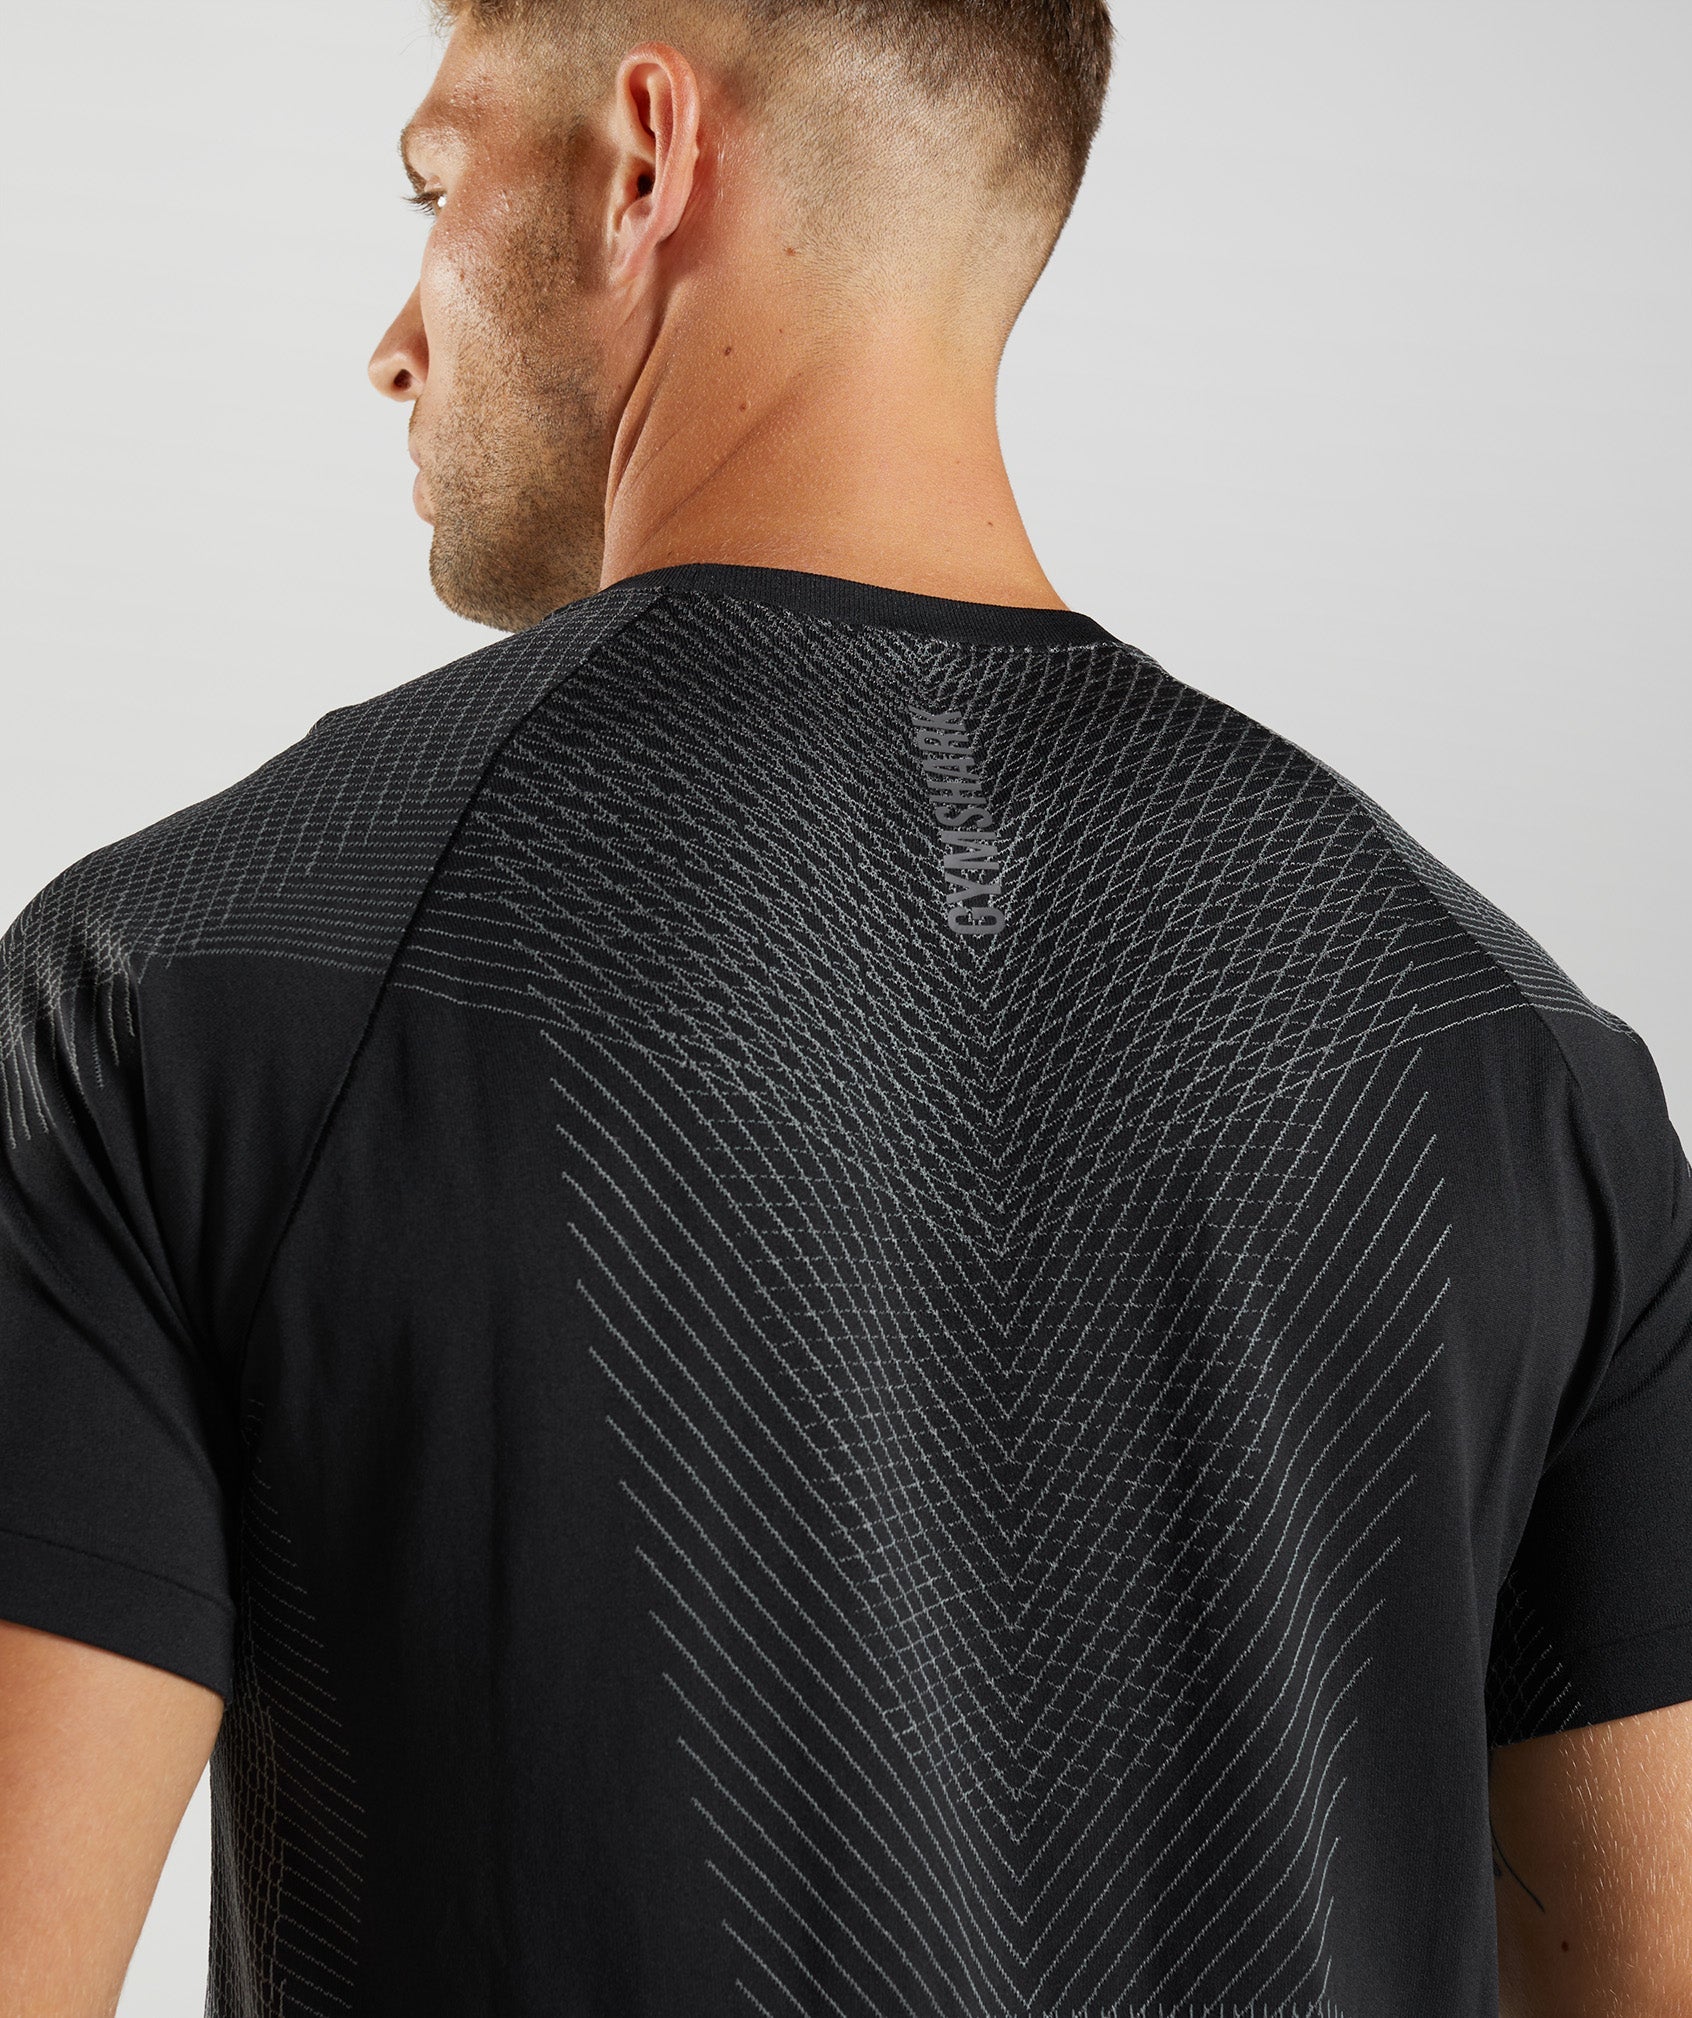 Apex Seamless T-Shirt in Black/Silhouette Grey - view 5